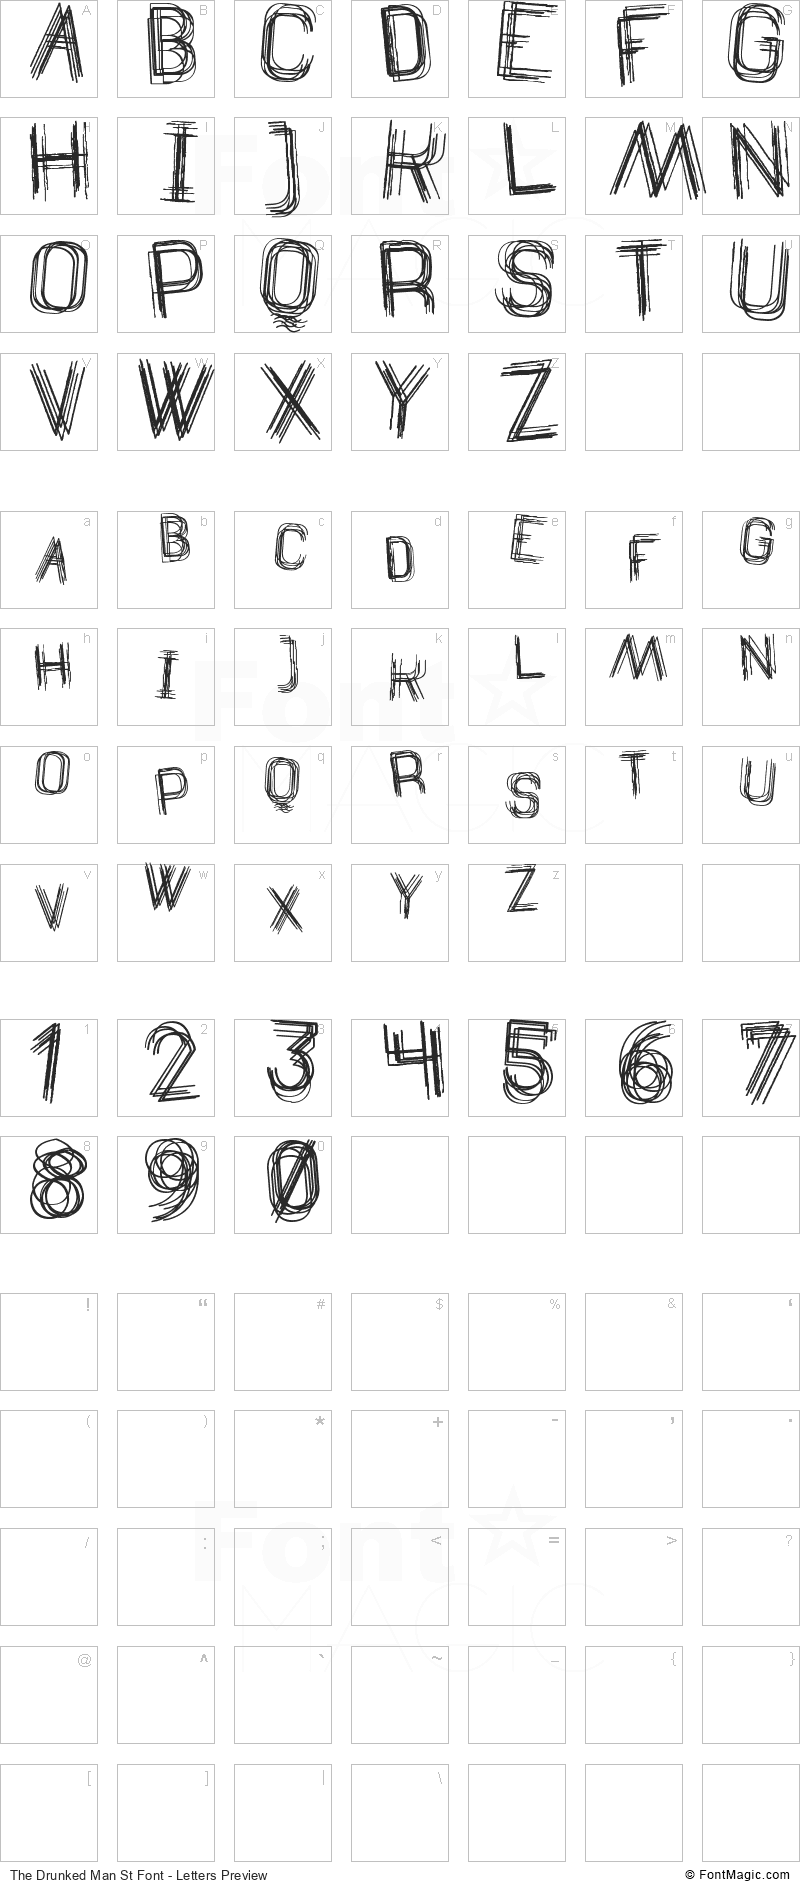 The Drunked Man St Font - All Latters Preview Chart